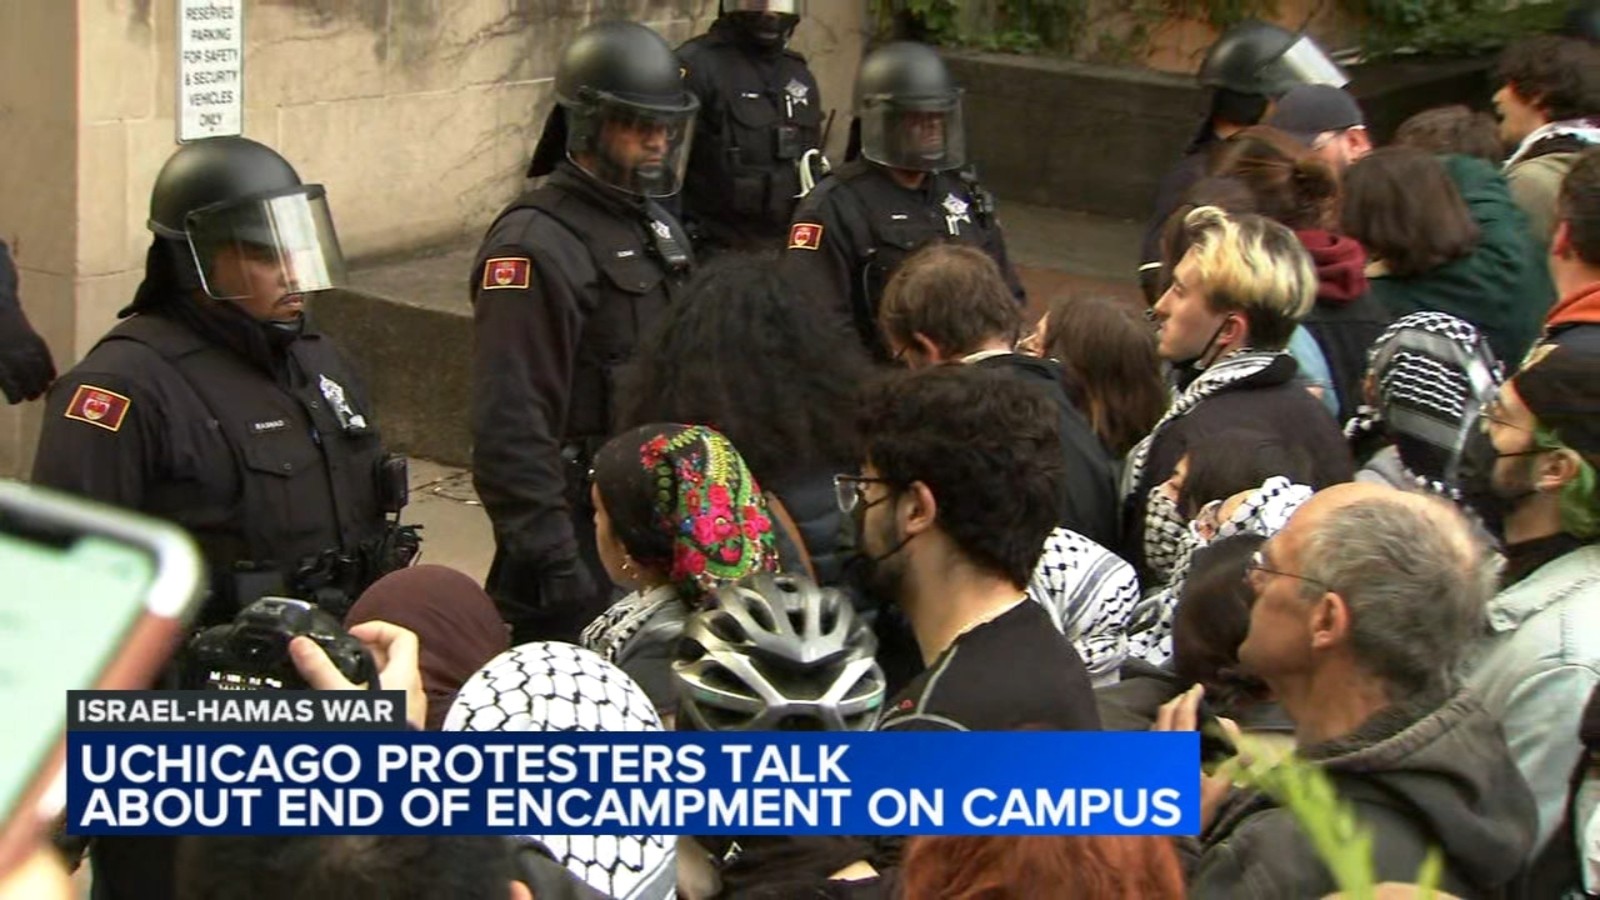 UChicago pro-Palestinian demonstrators call end of encampment a 'violent raid' by campus police